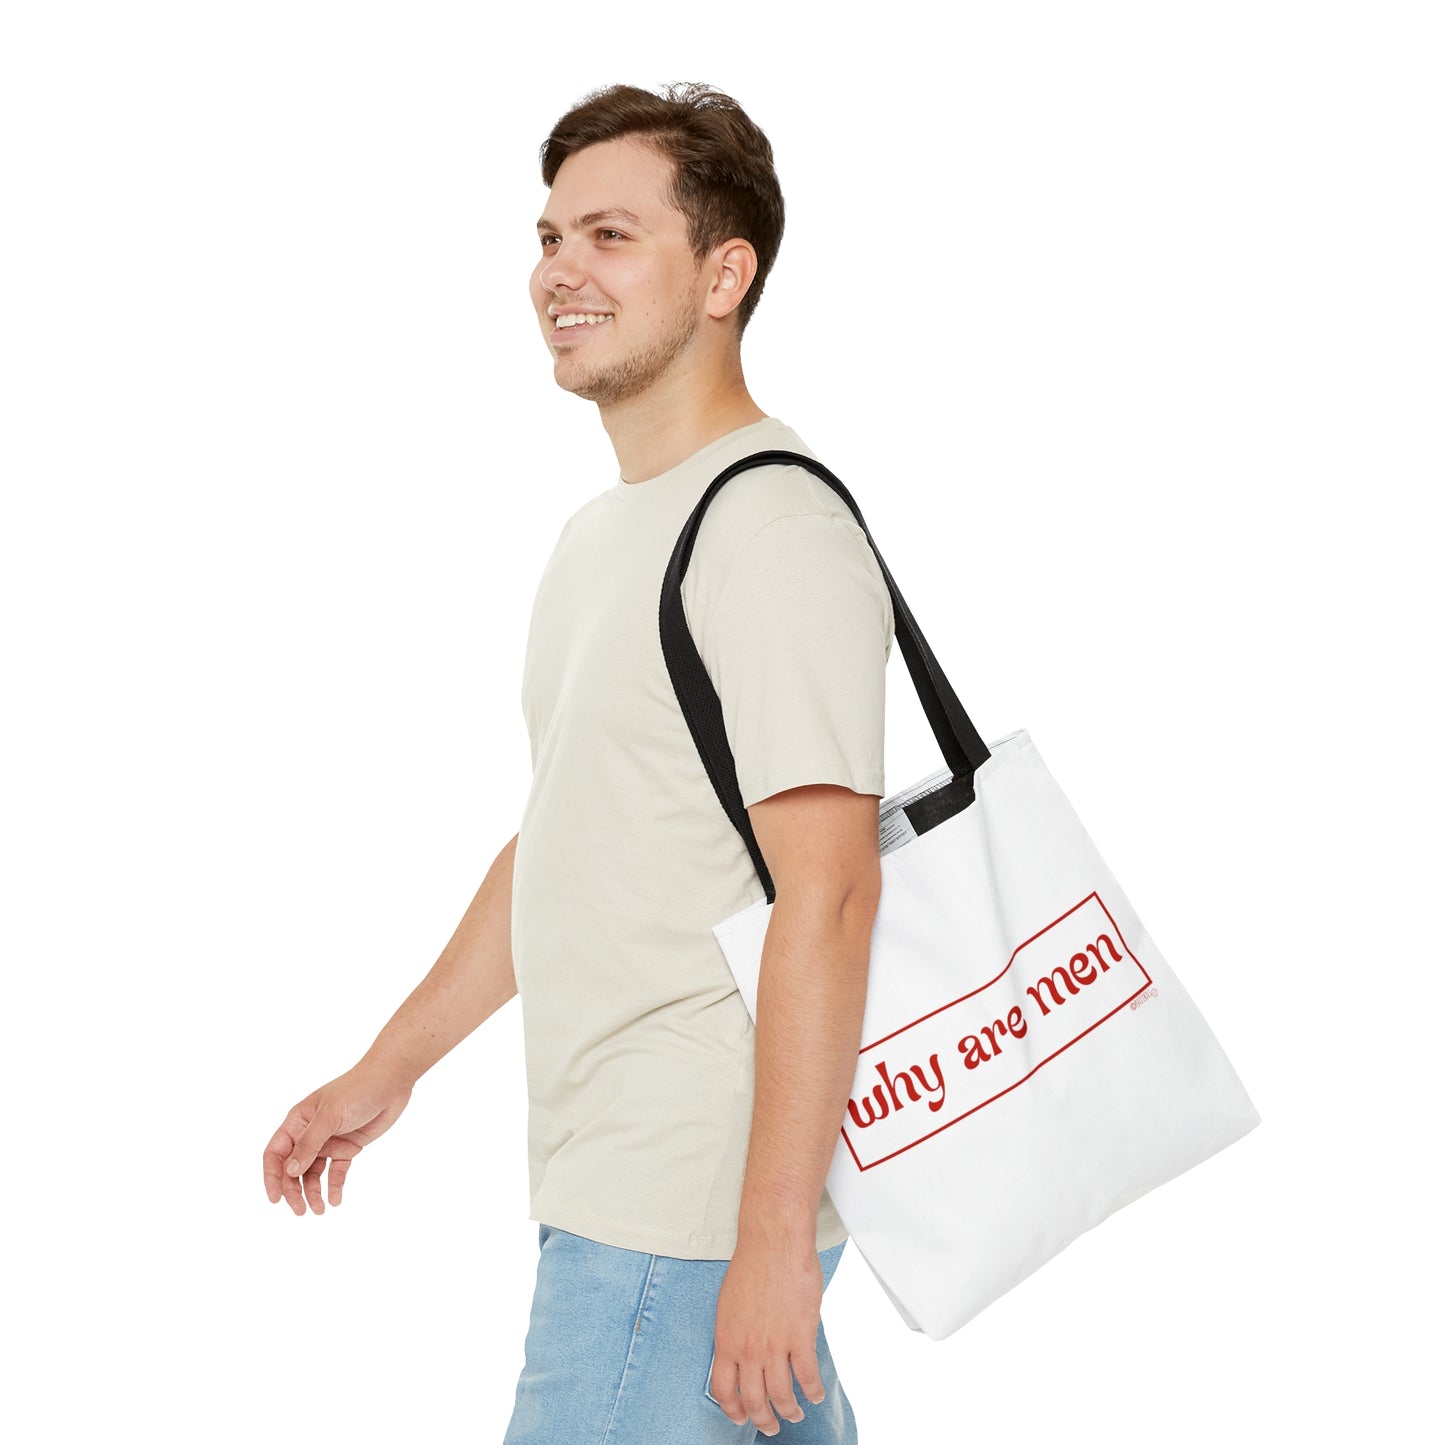 Why Are Men - Tote Bag